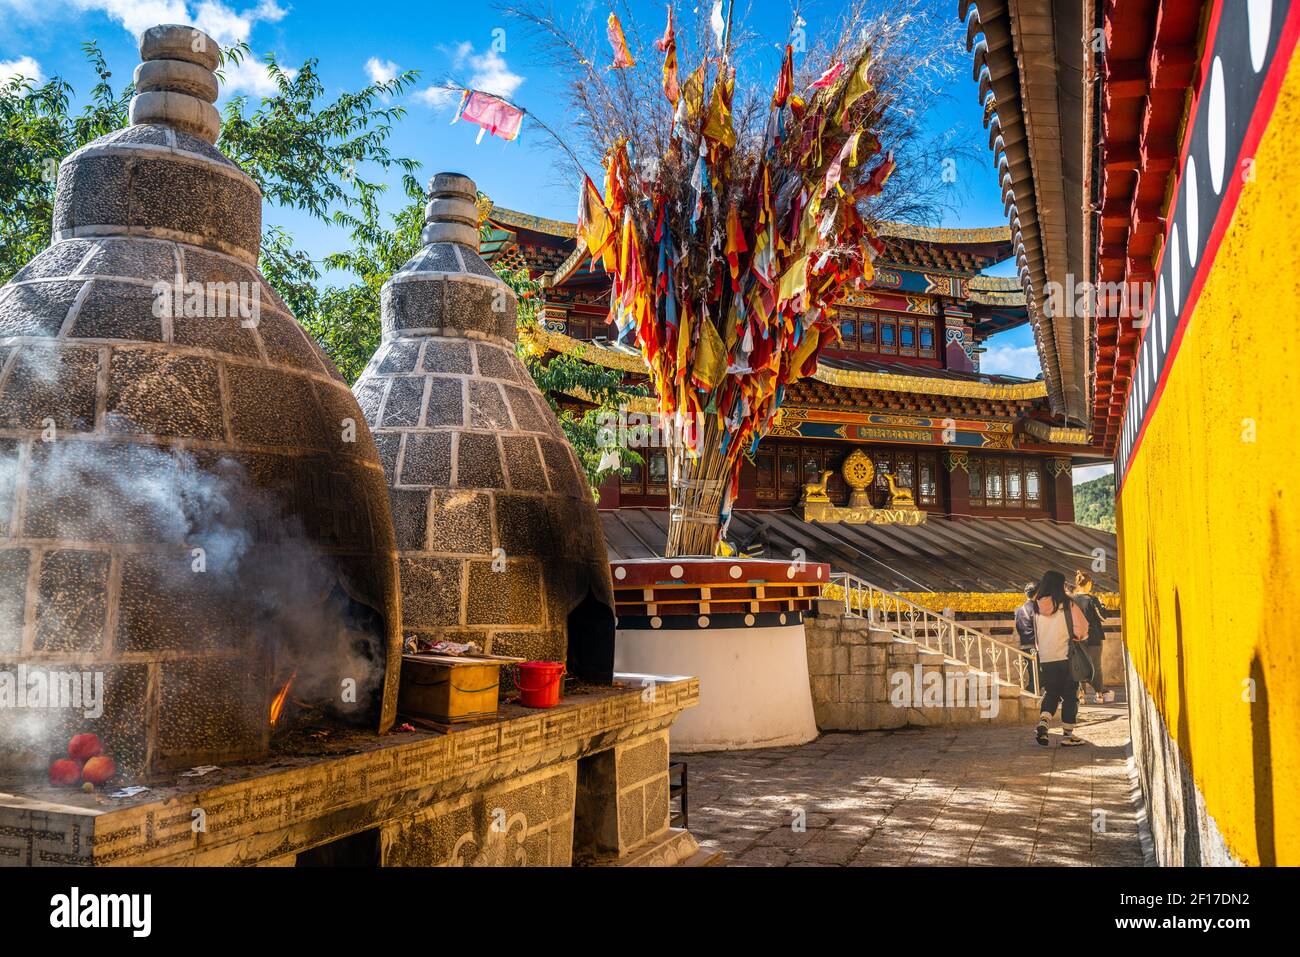 Guishan Dafo temple view with steaming offering burning and prayer flags Dharma wheel in background in Dukezong old town in Shangri-La Yunnan China Stock Photo